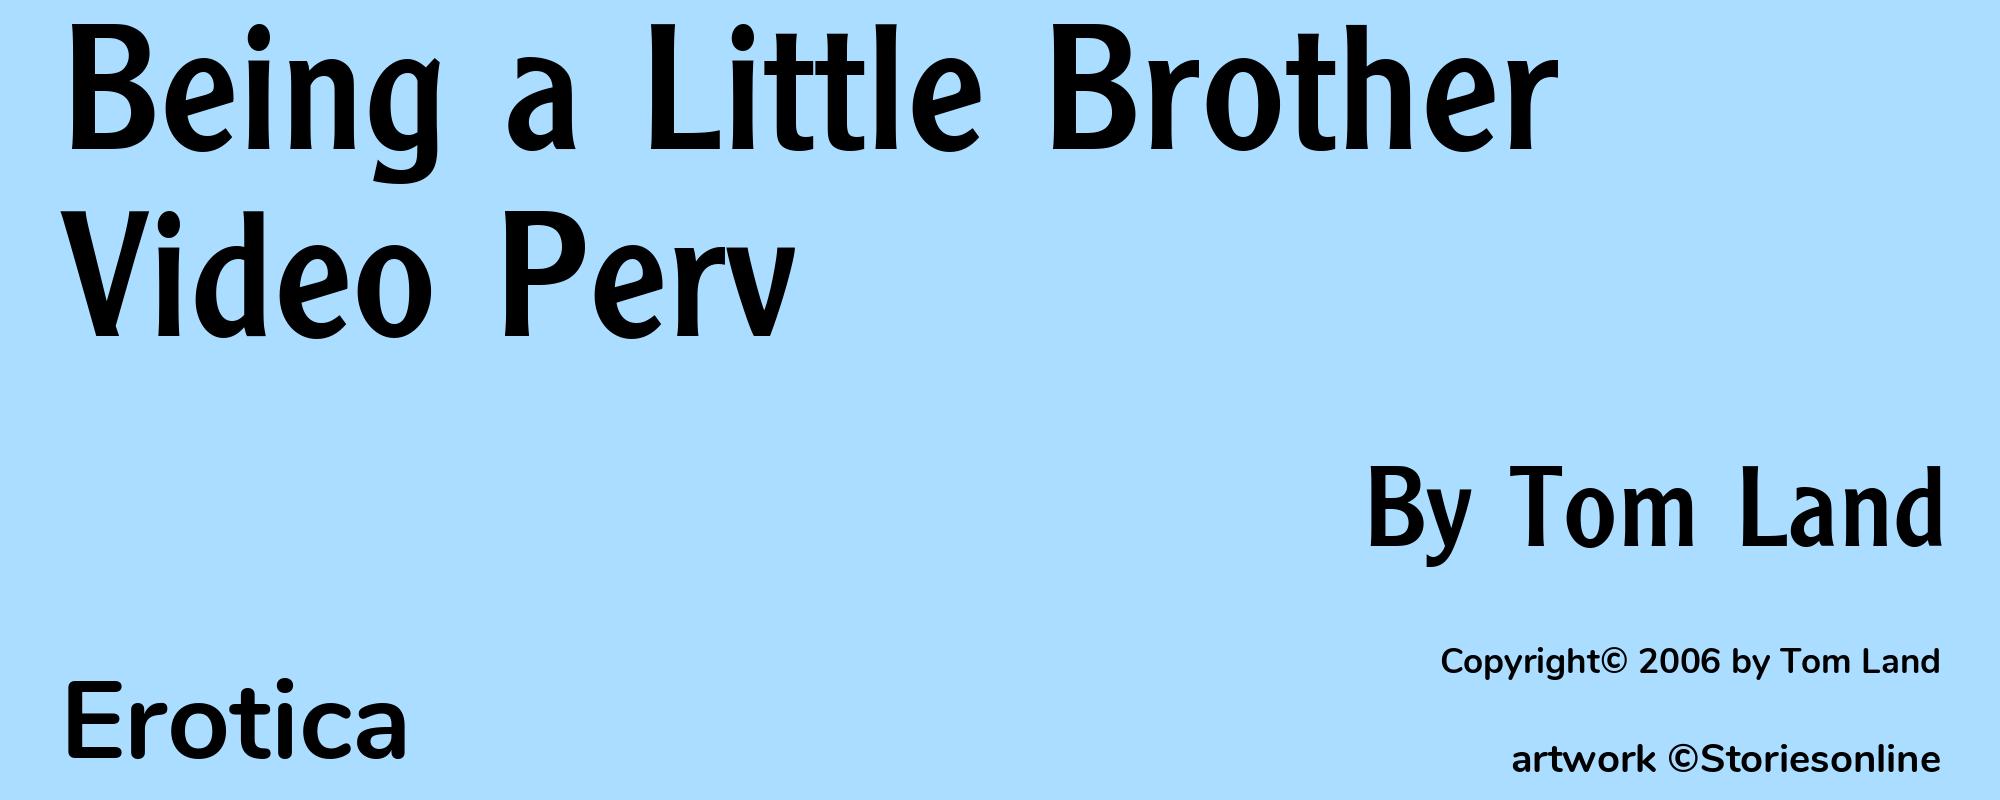 Being a Little Brother Video Perv - Cover